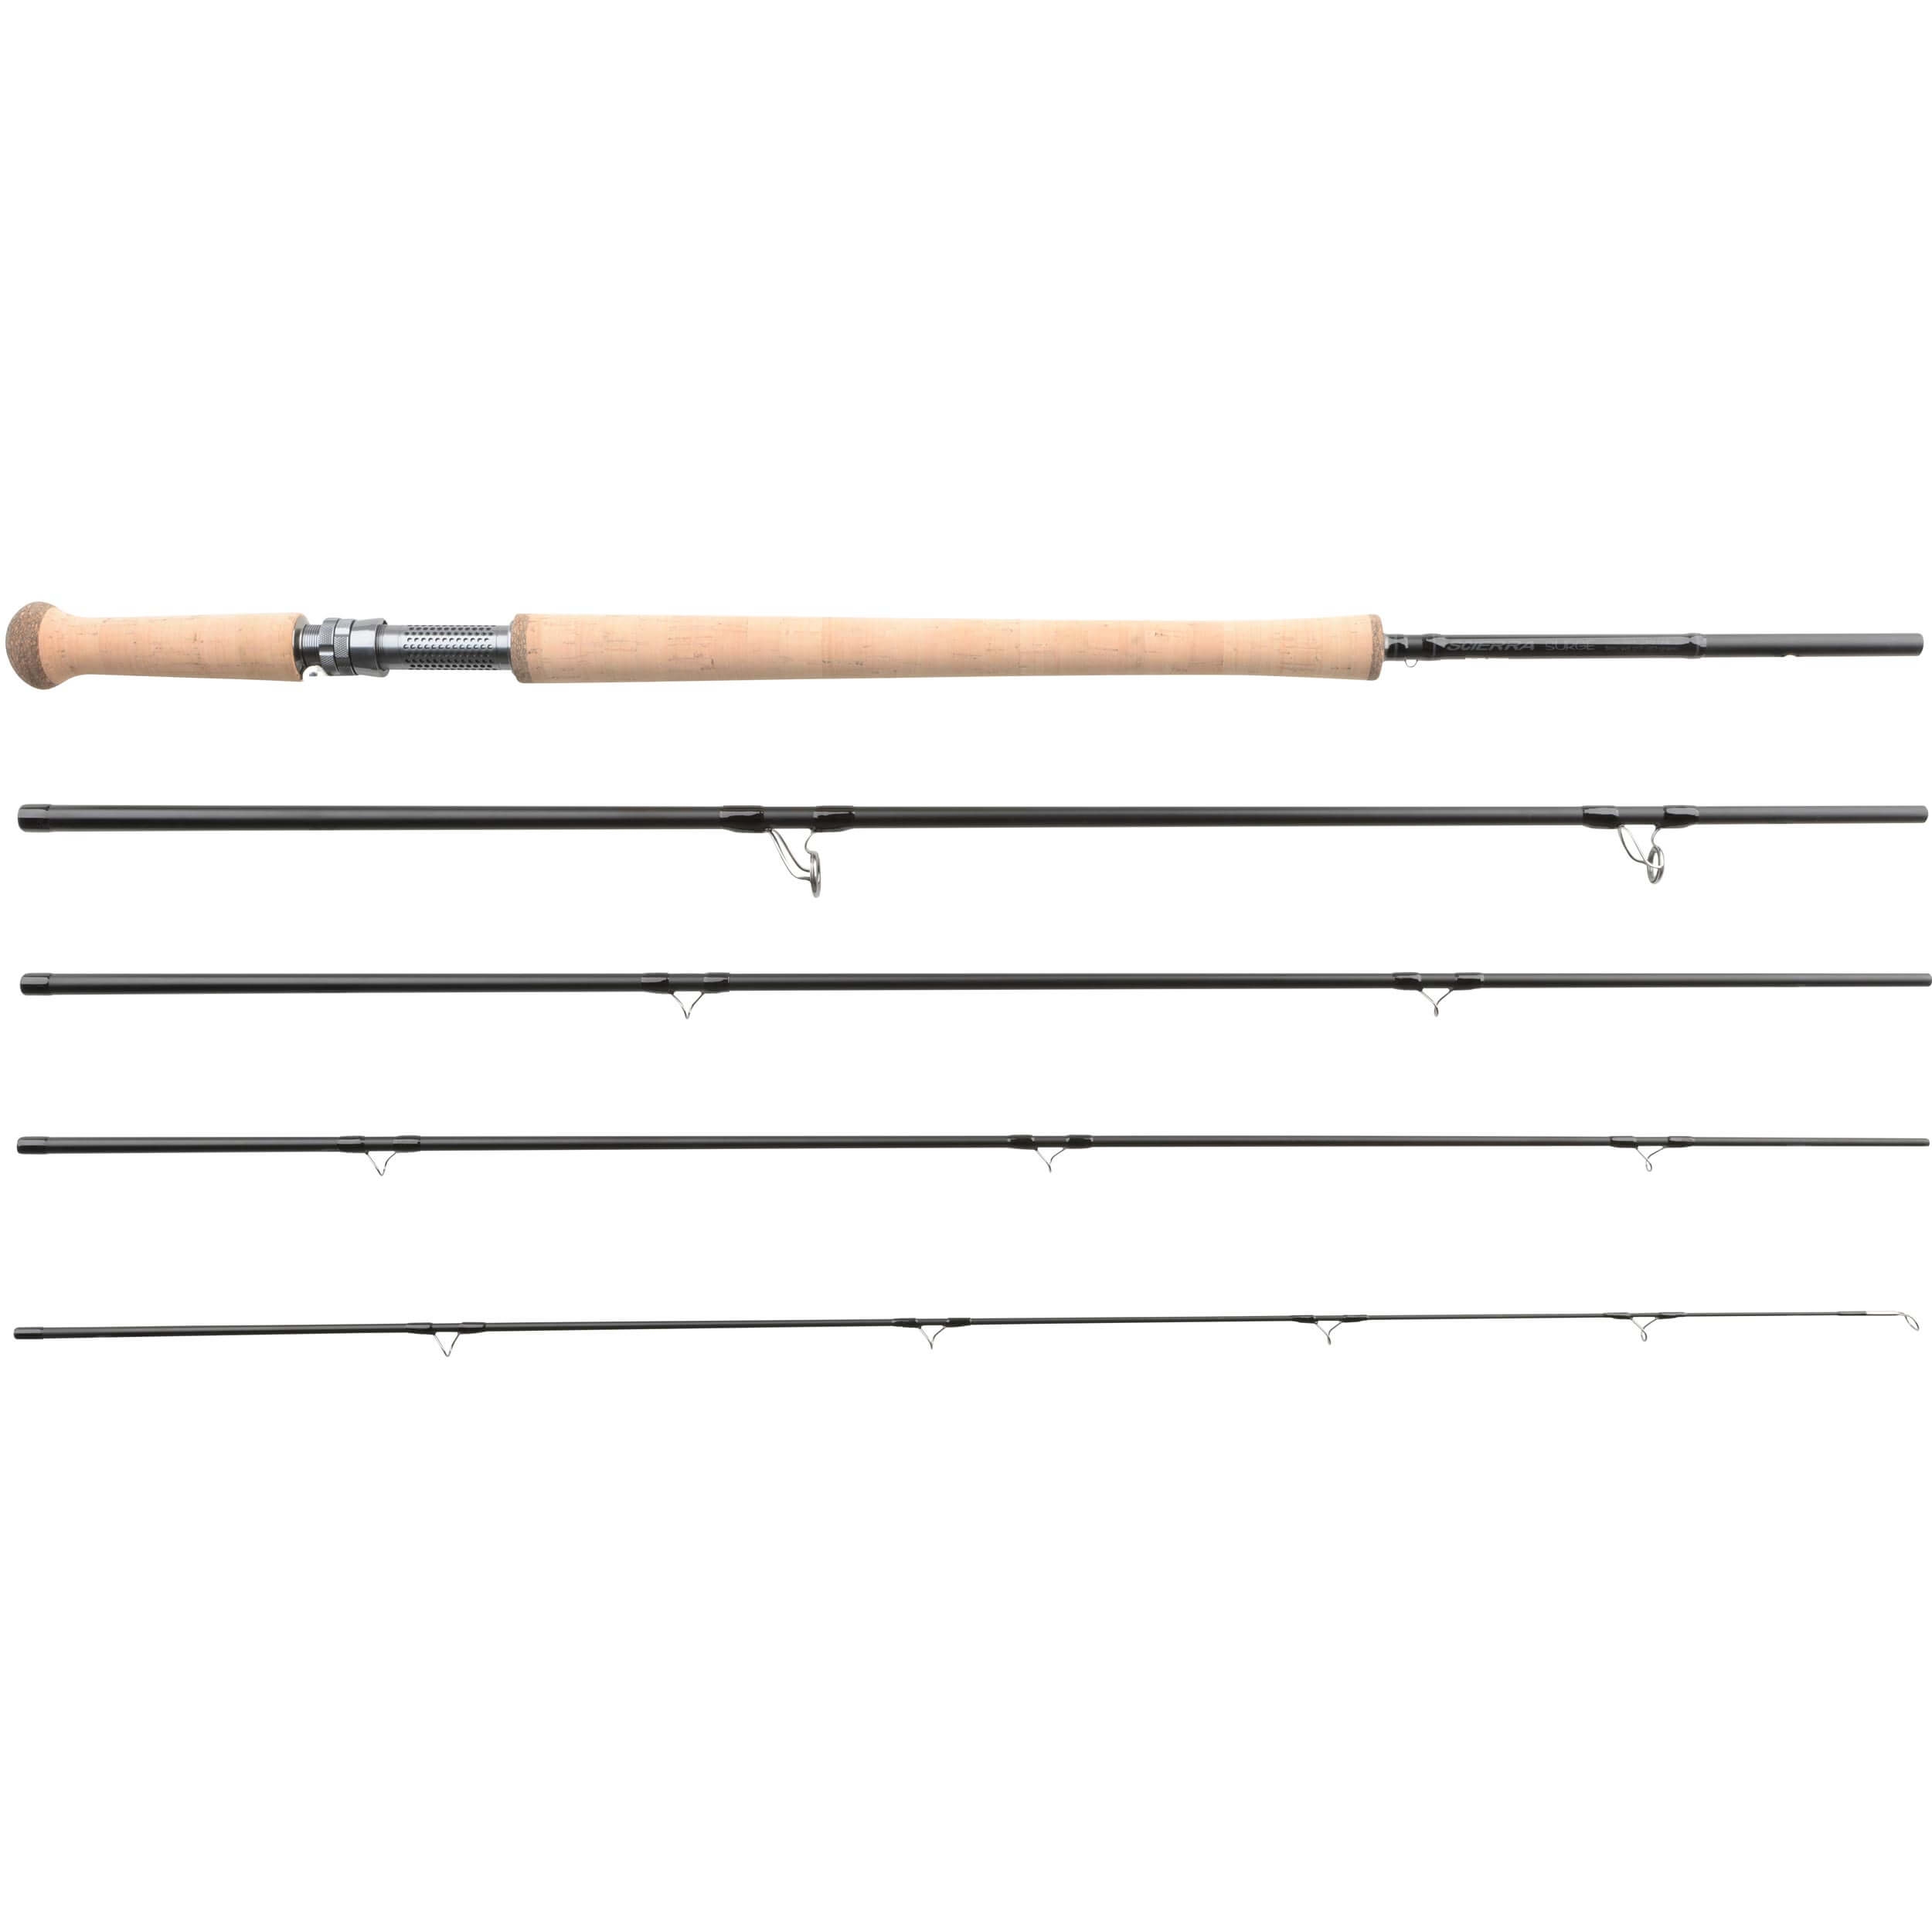 Scierra Surge Double Handed Fly Rod - Salmon Spey Fly Fishing Rods